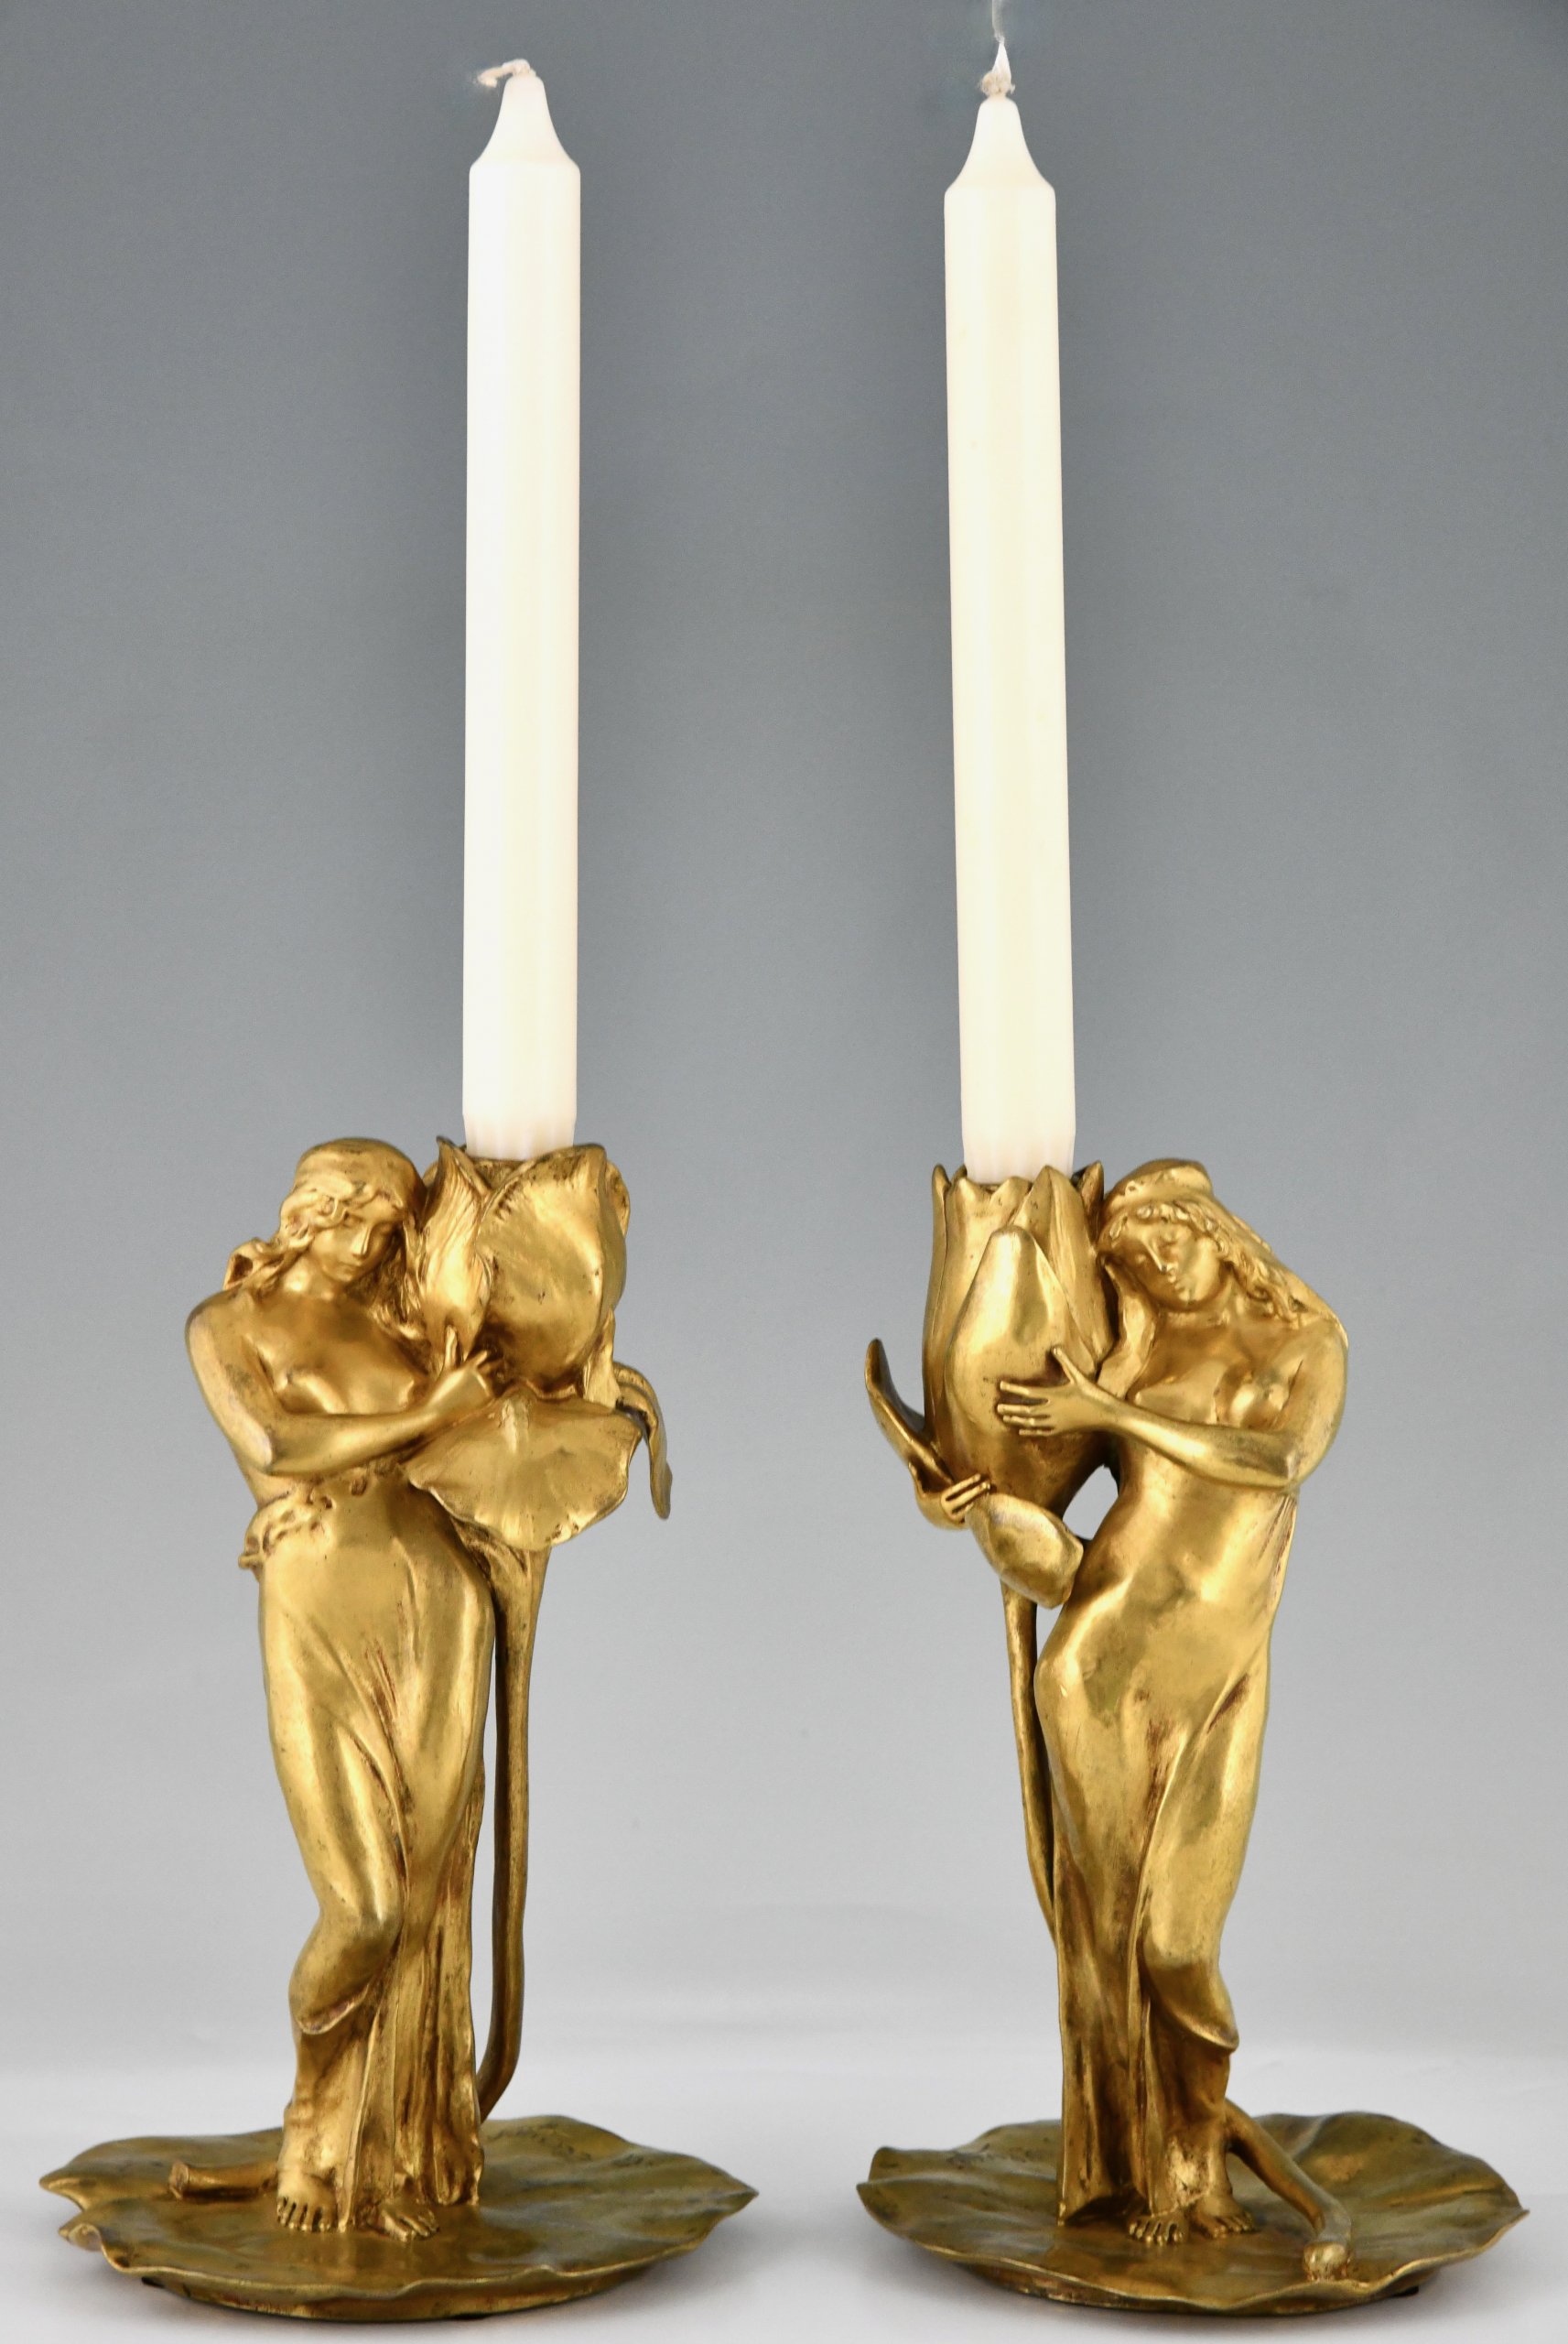 Pair of Art Nouveau bronze candlesticks lady with flower Iris and Lotus